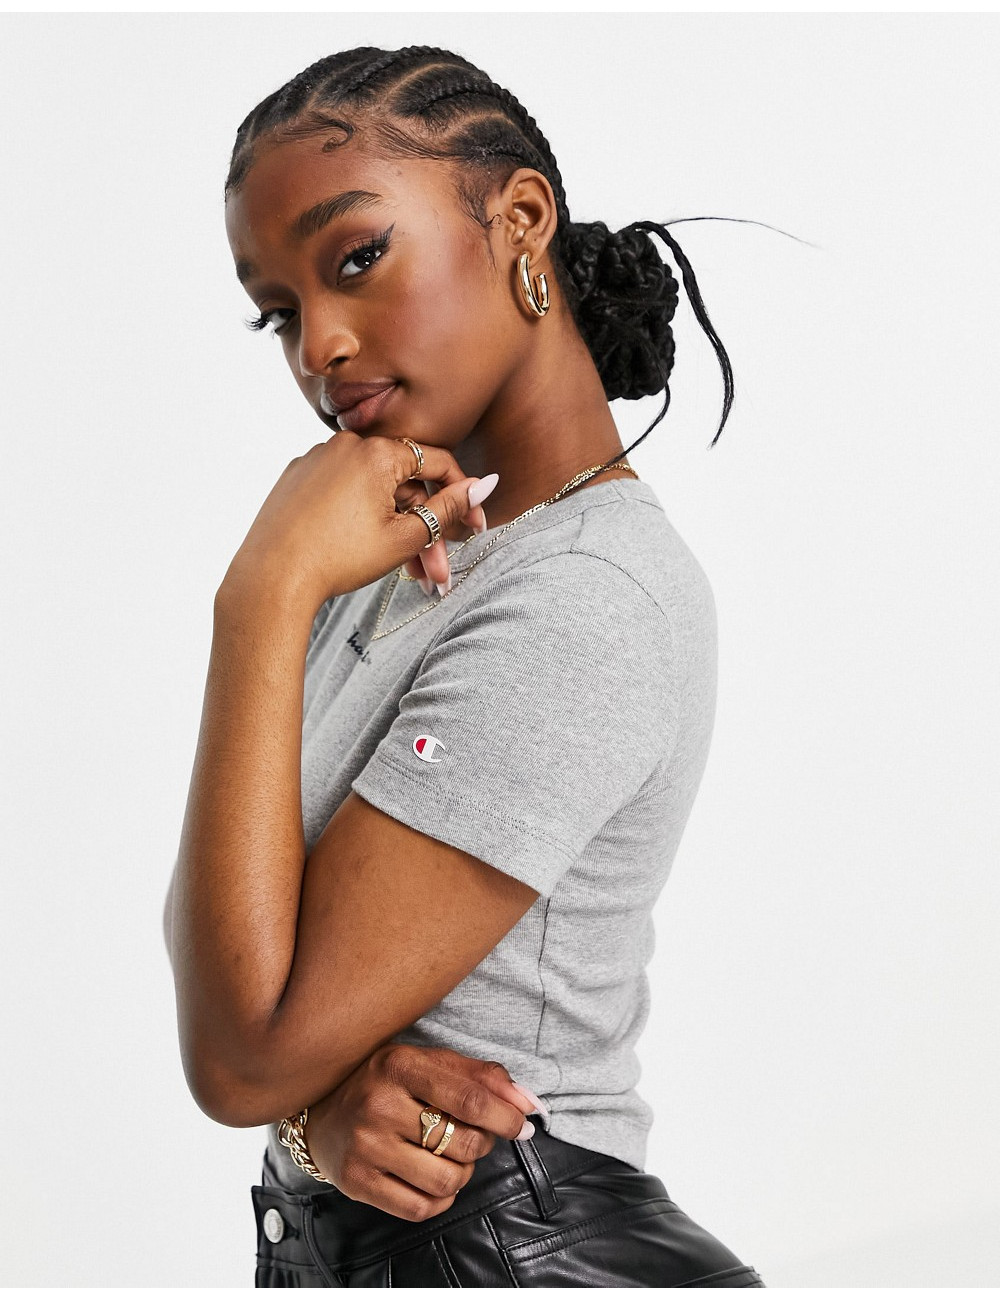 Champion ribbed crop top in...